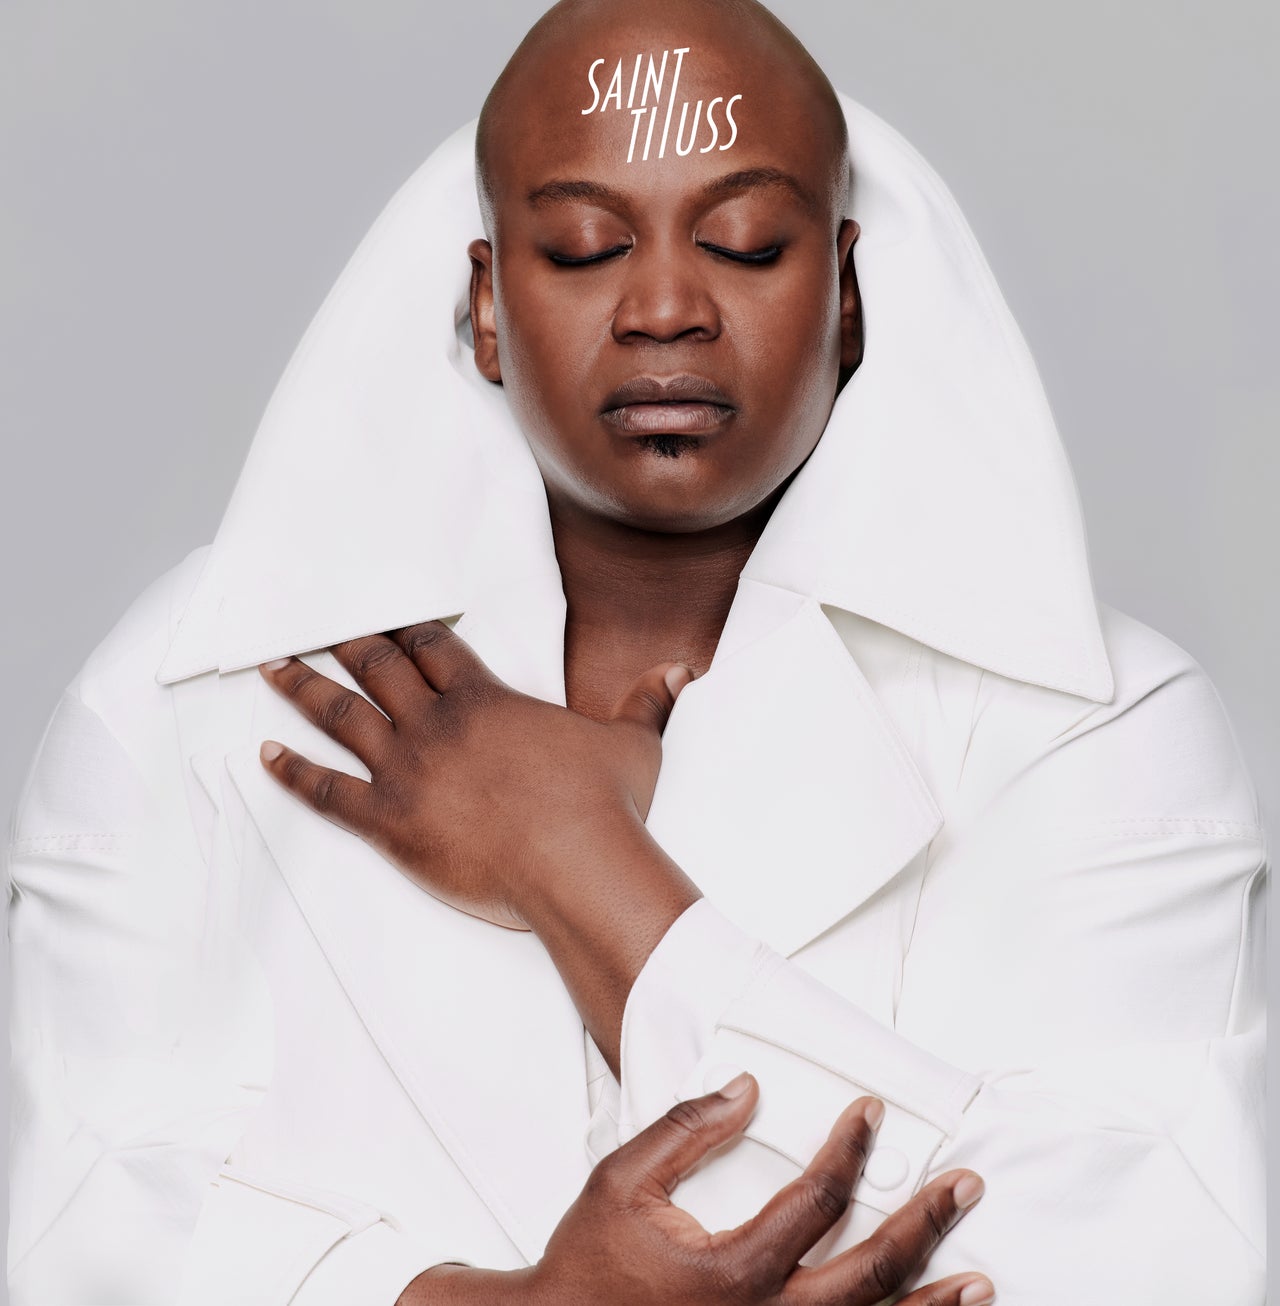 Tituss Burgess Is Full Of Love And Optimism On New EP 'Saint ...